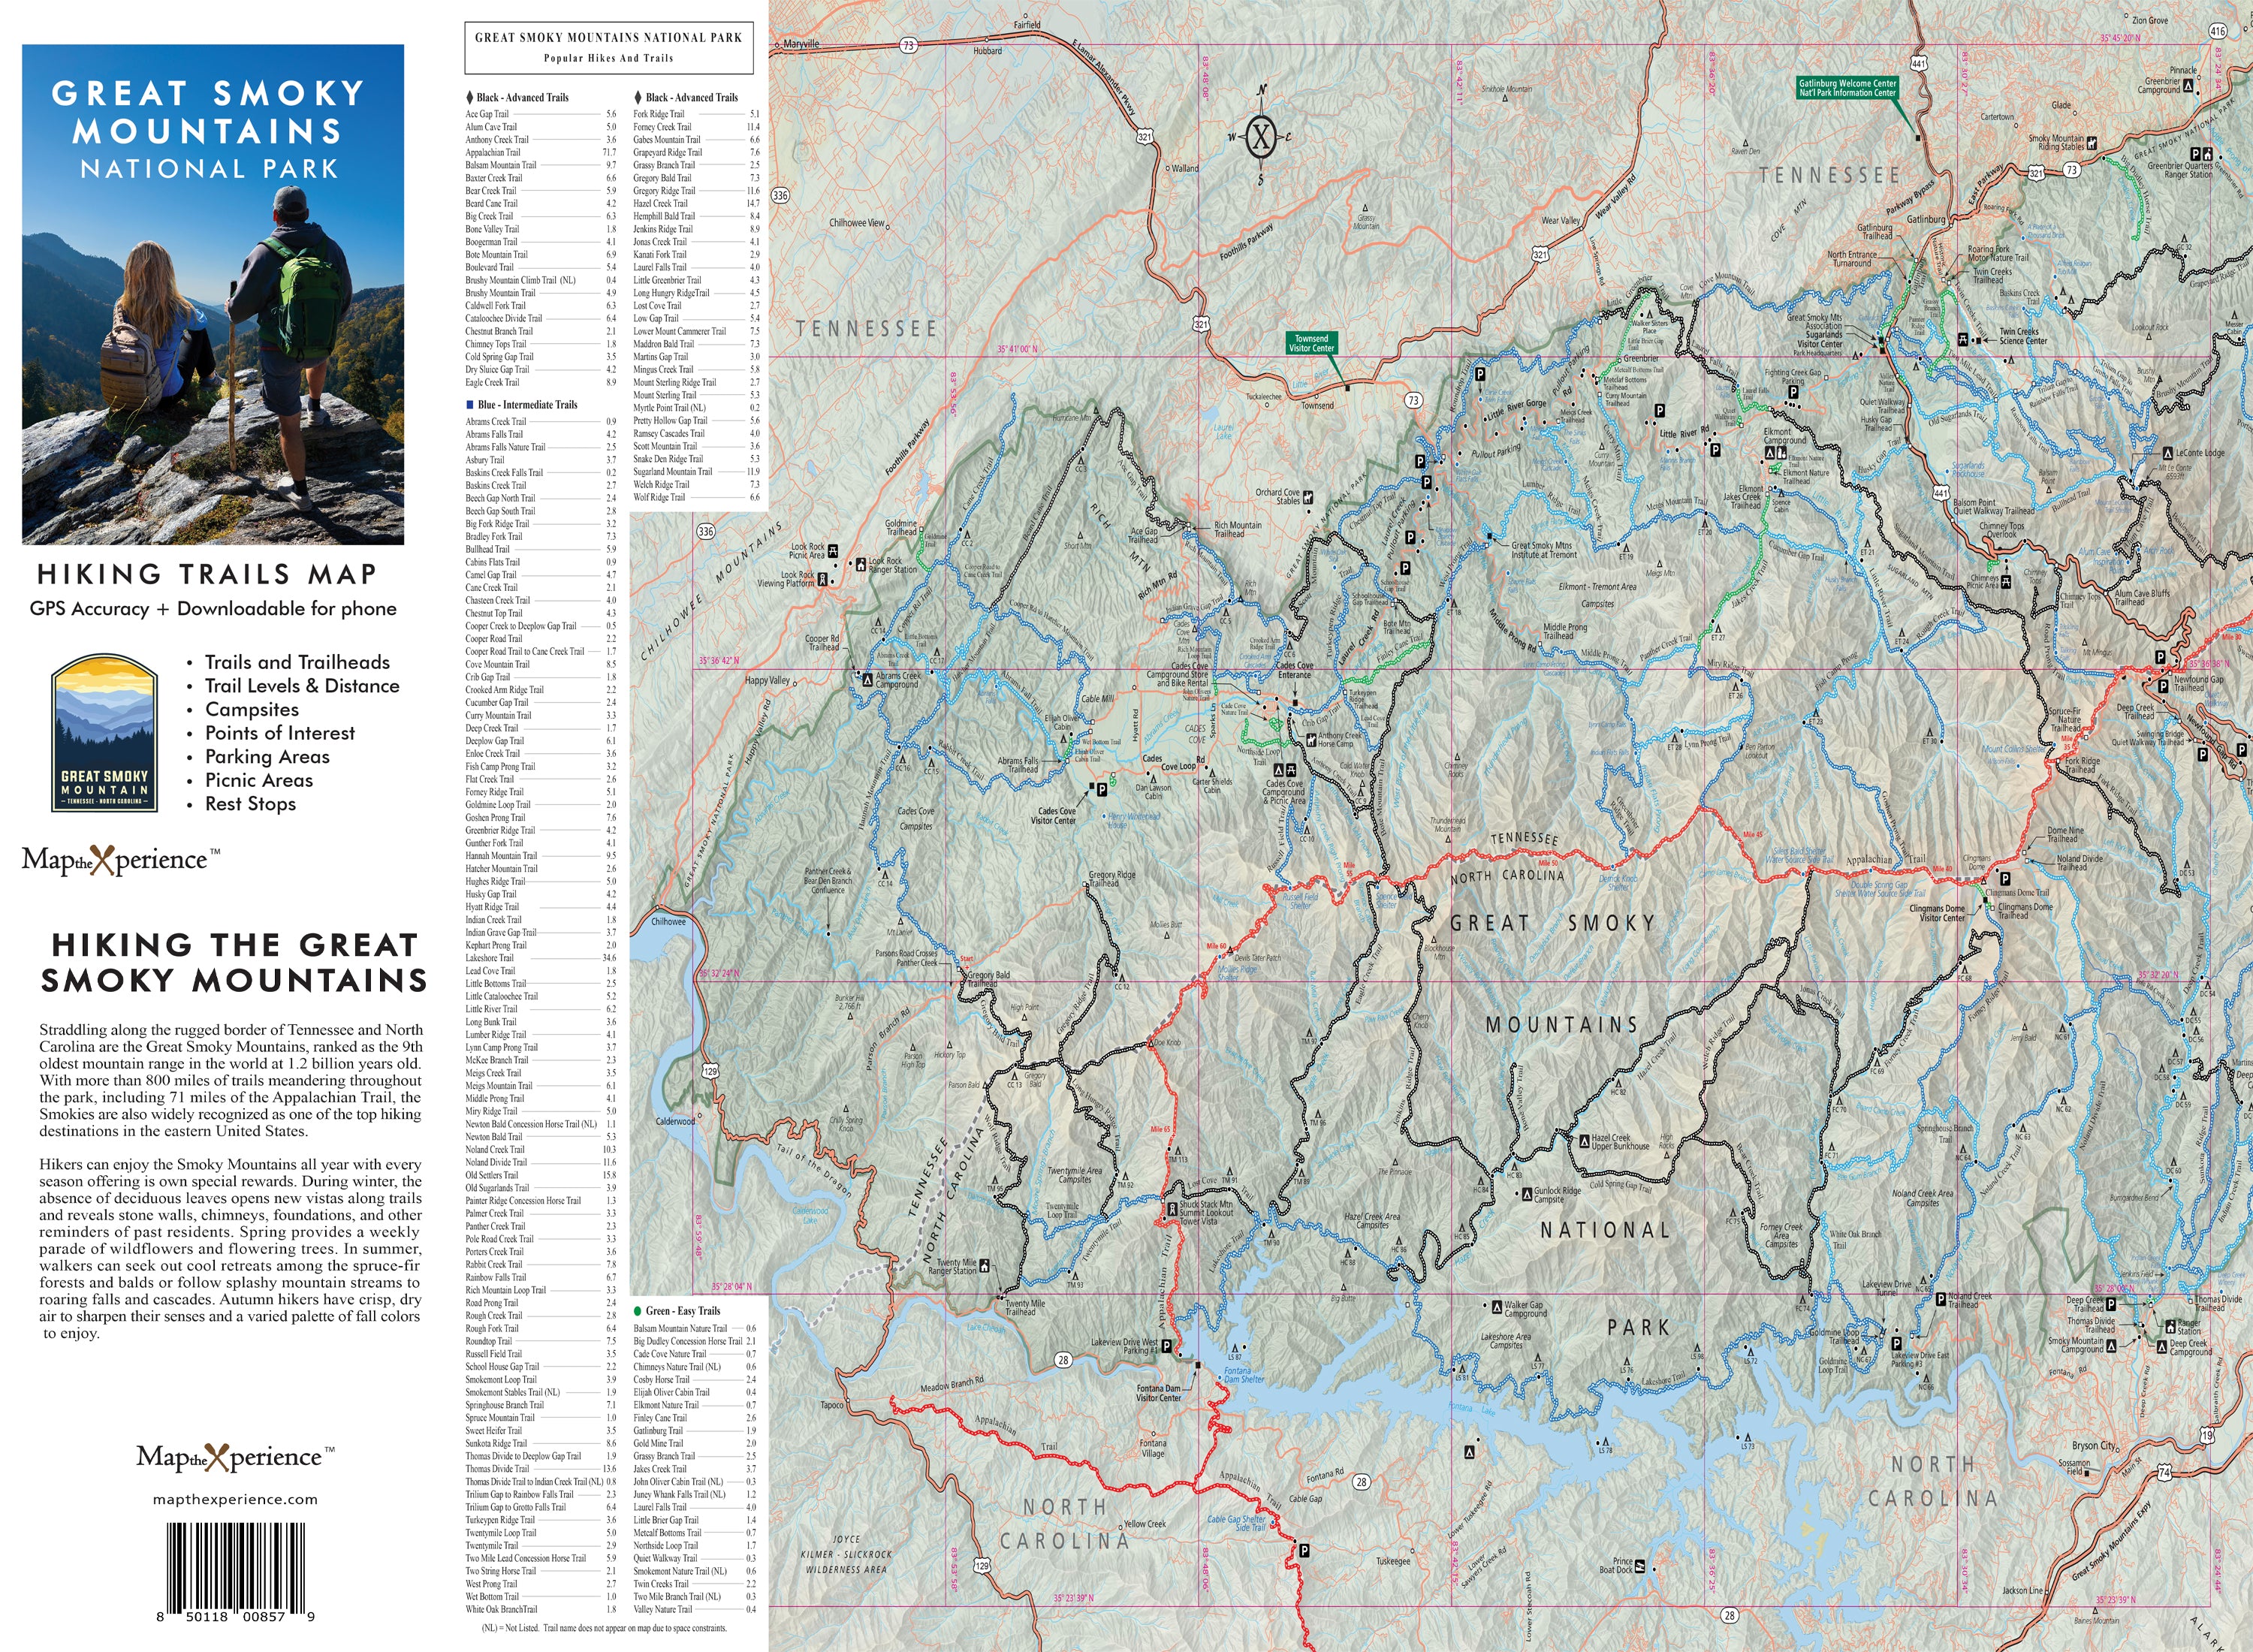 Great Smoky Mountain National Park Hiking Trail Map